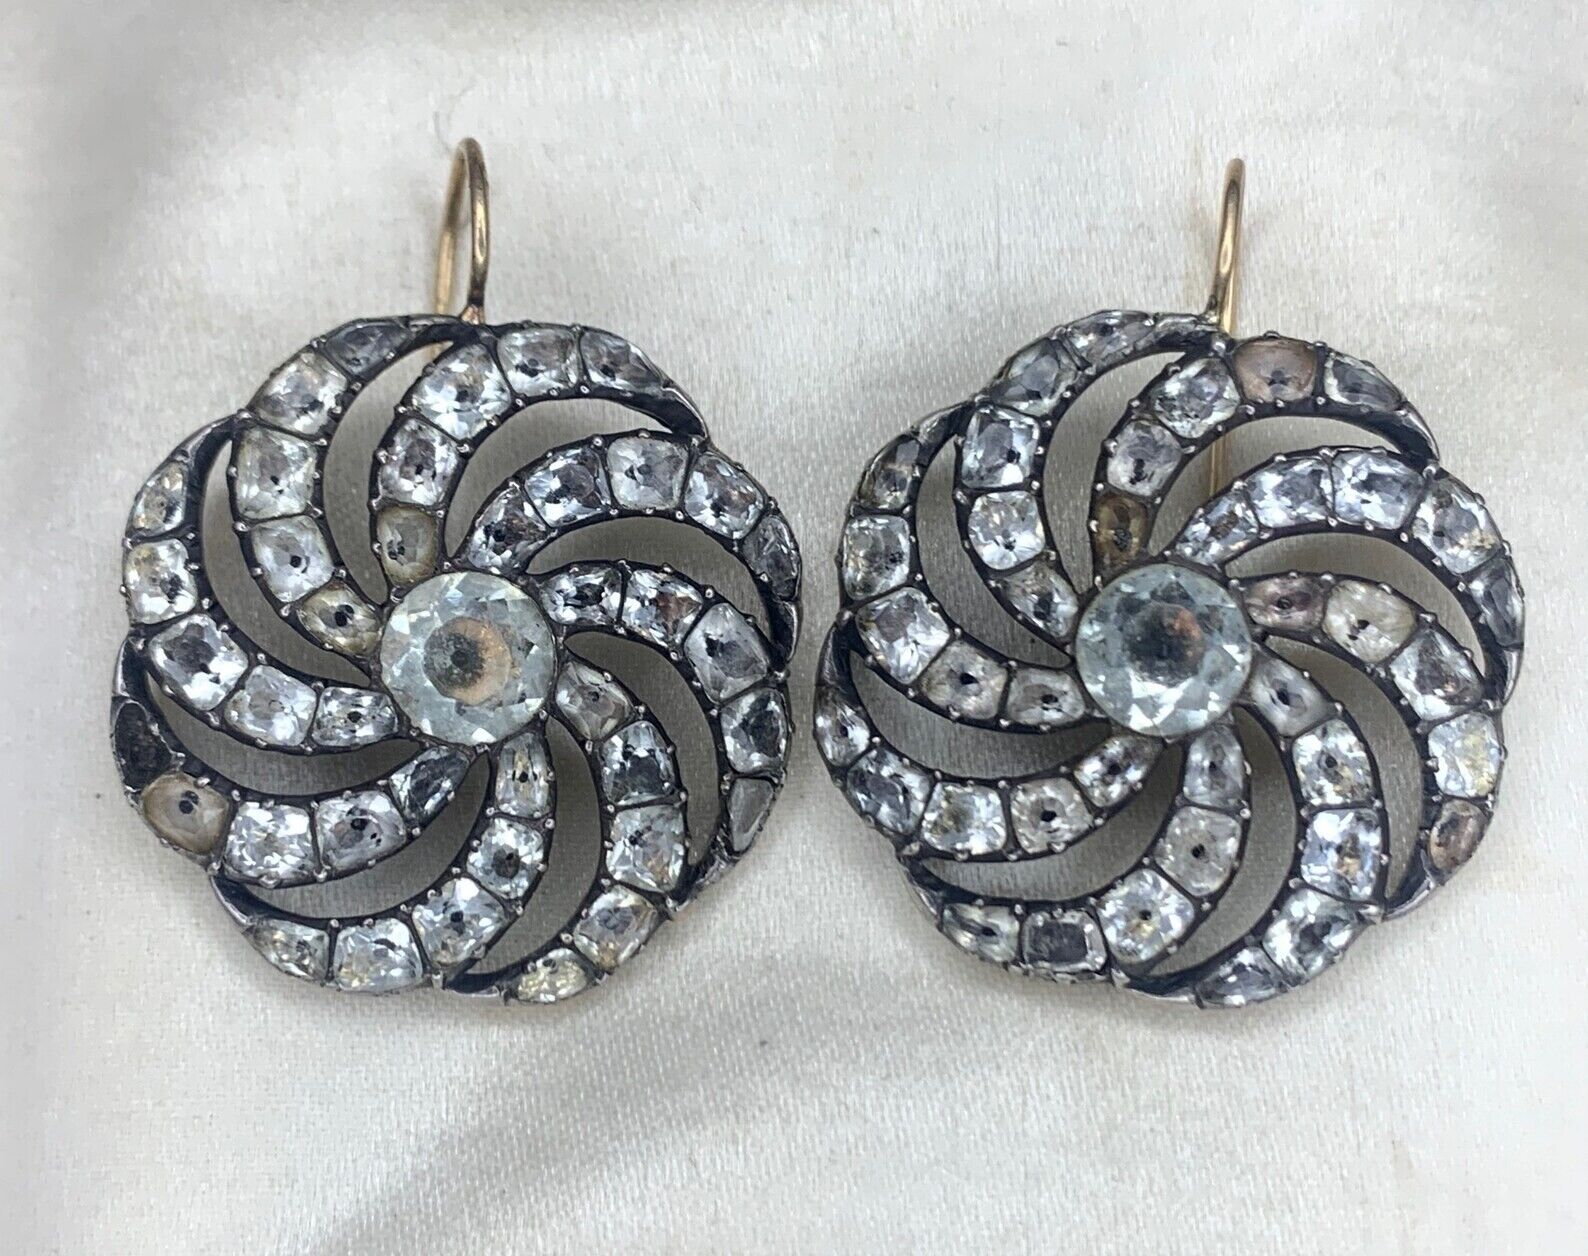 Vintage Antique Round Cut Cubic Zirconia Dangle Earrings Sterling Silver 925